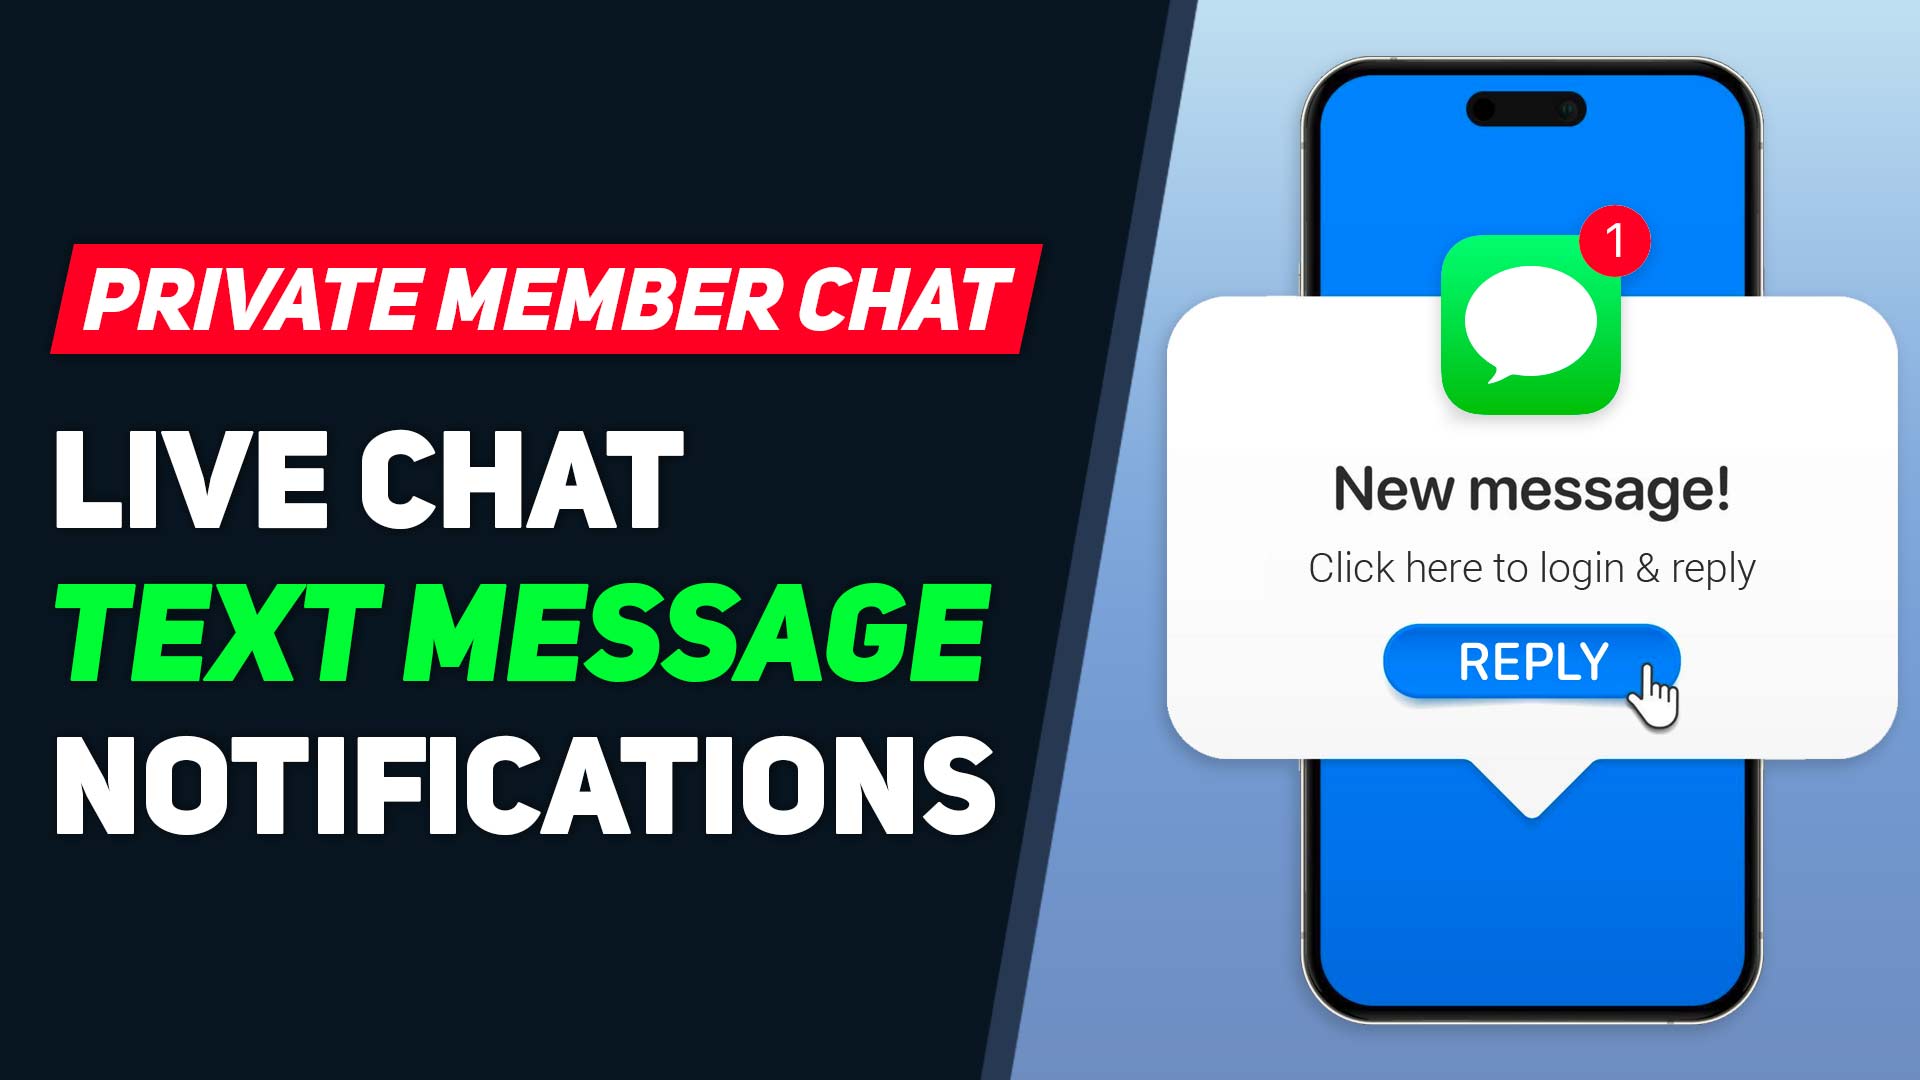 Send Real-Time SMS Notifications for Private Member Chat Messages